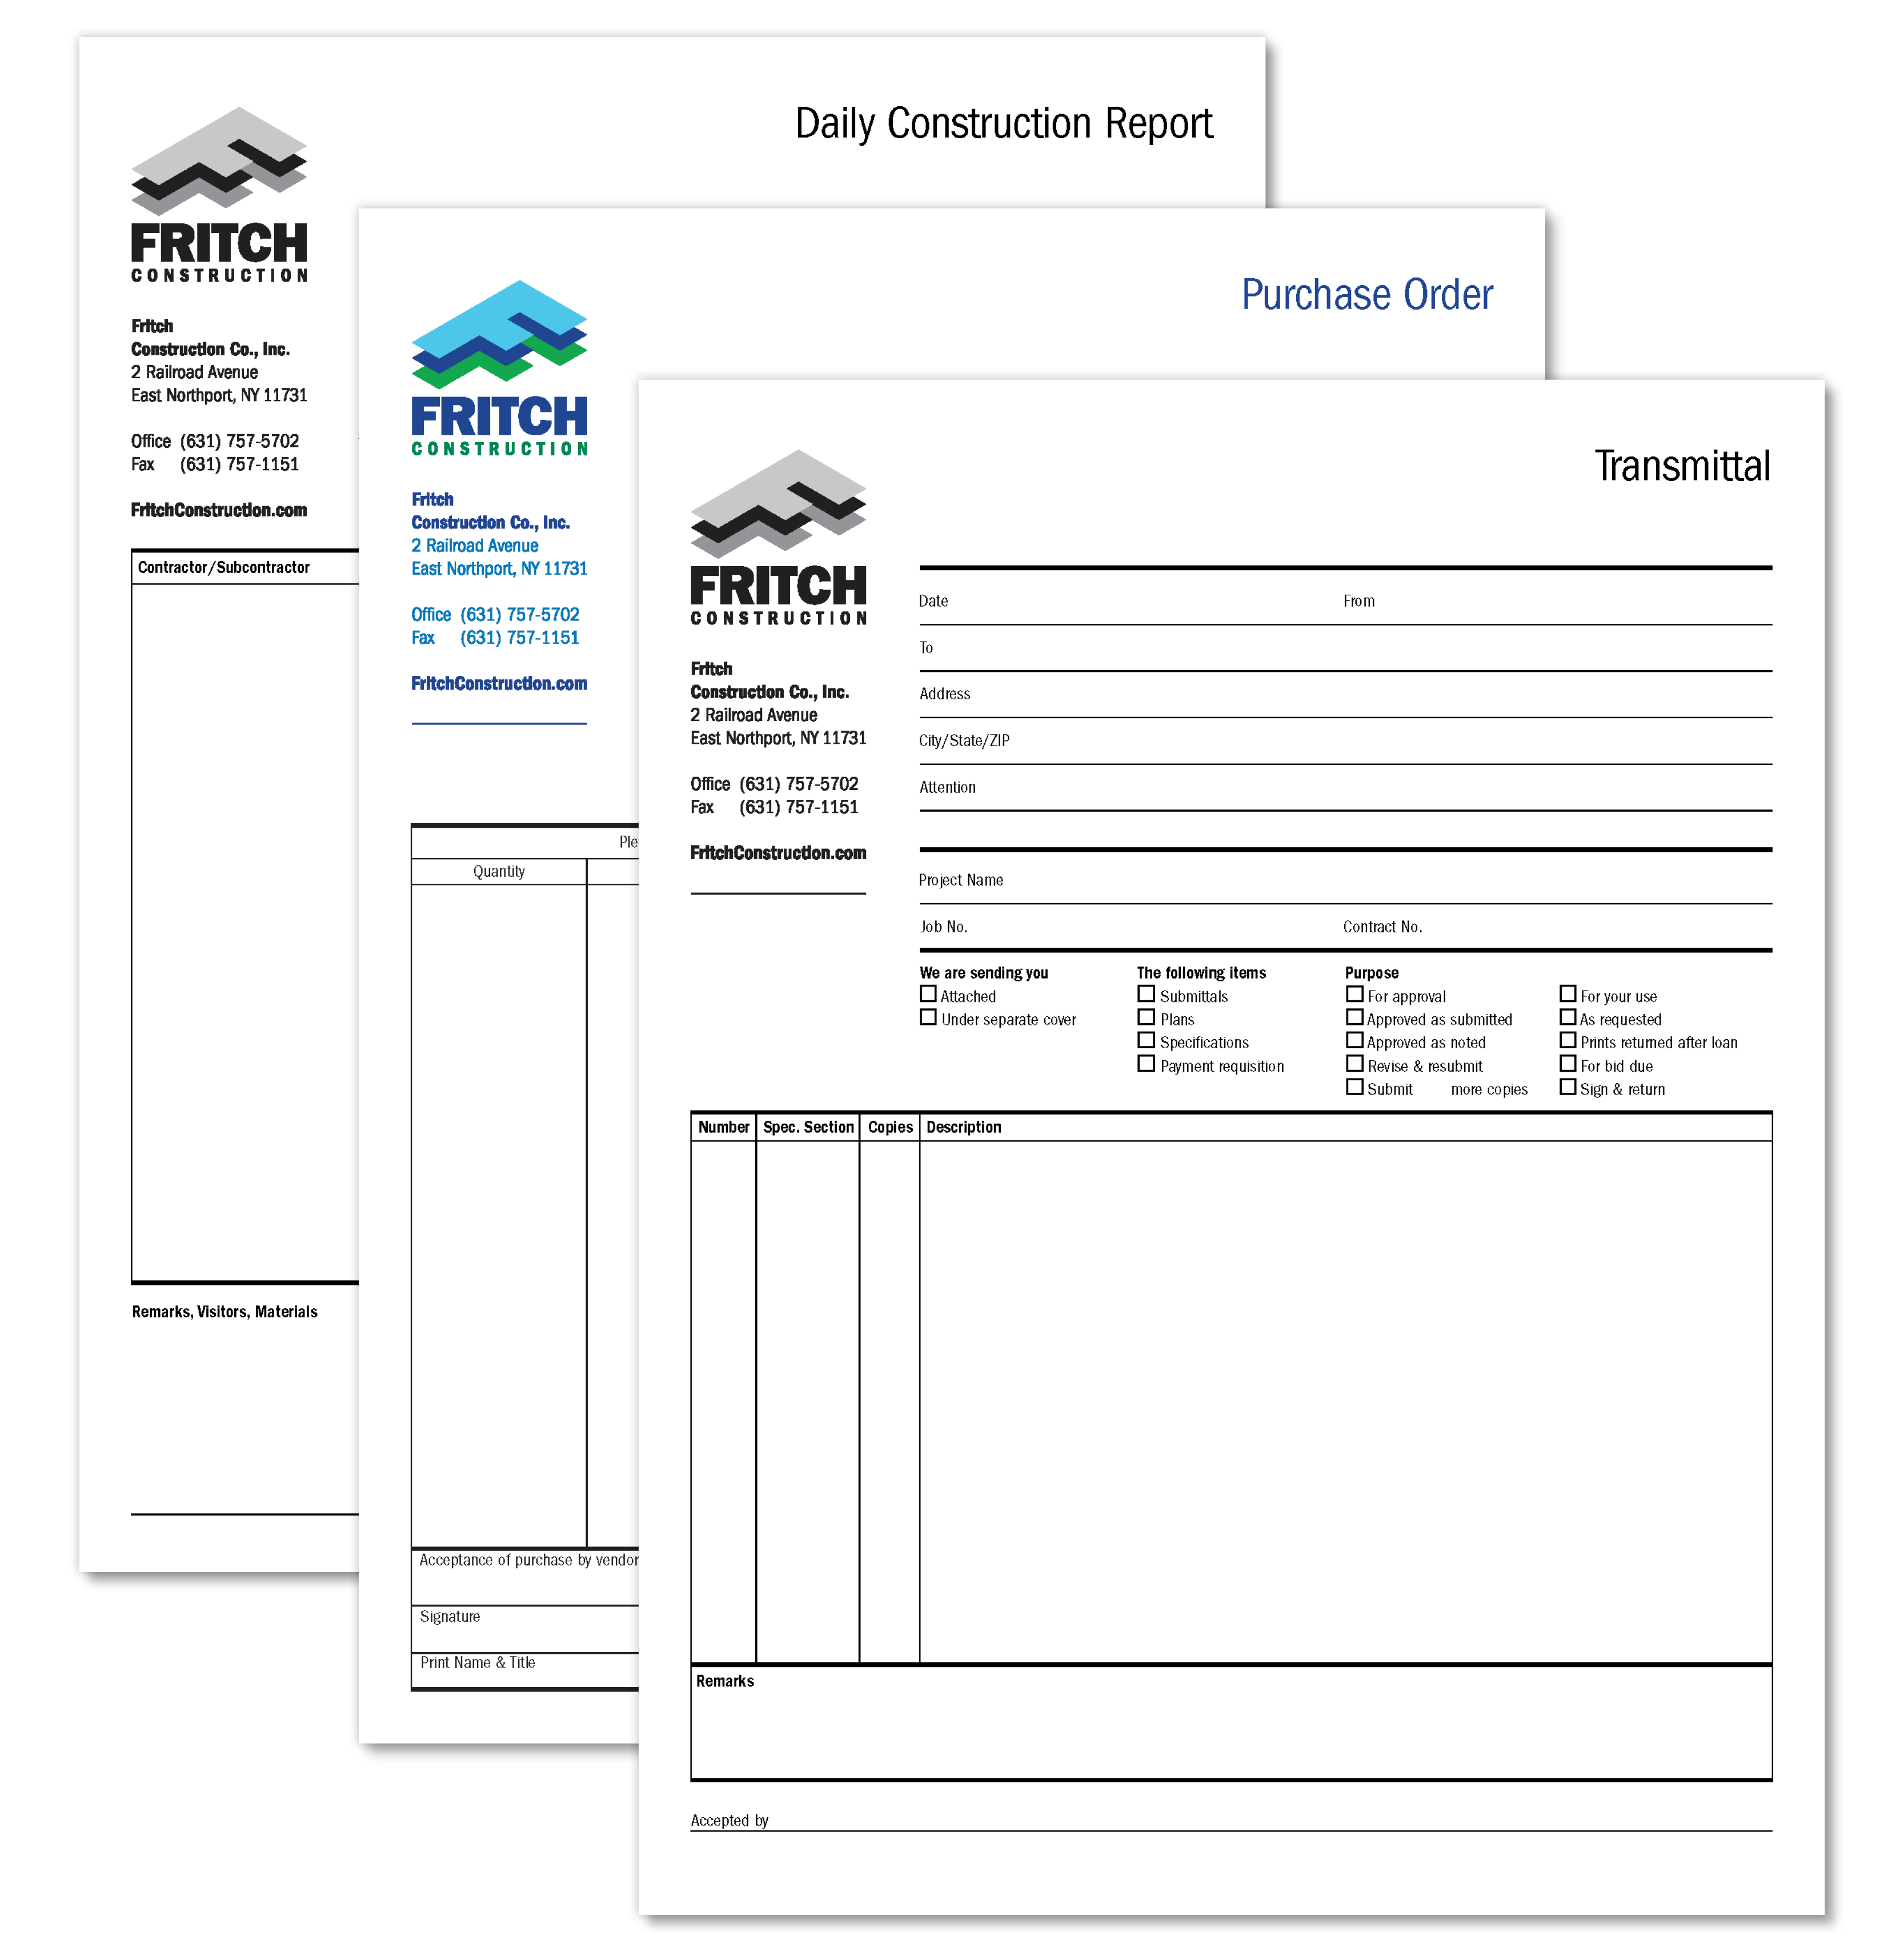 A set of forms designed for Fritch Construction